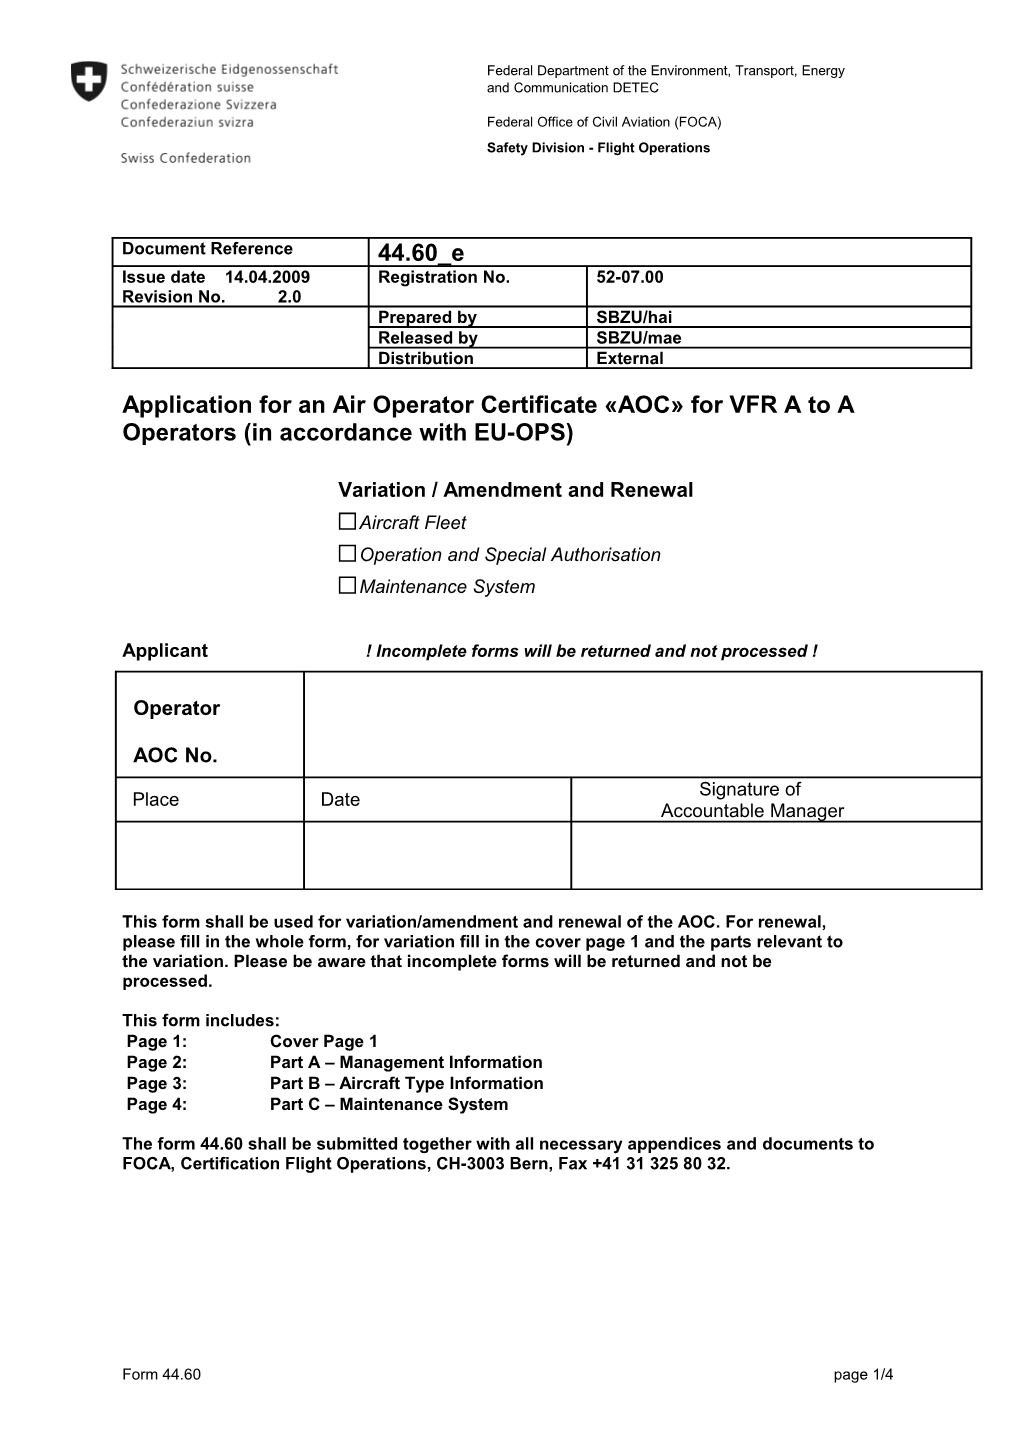 Application for an Air Operator Certificate AOC for VFR a to a Operators